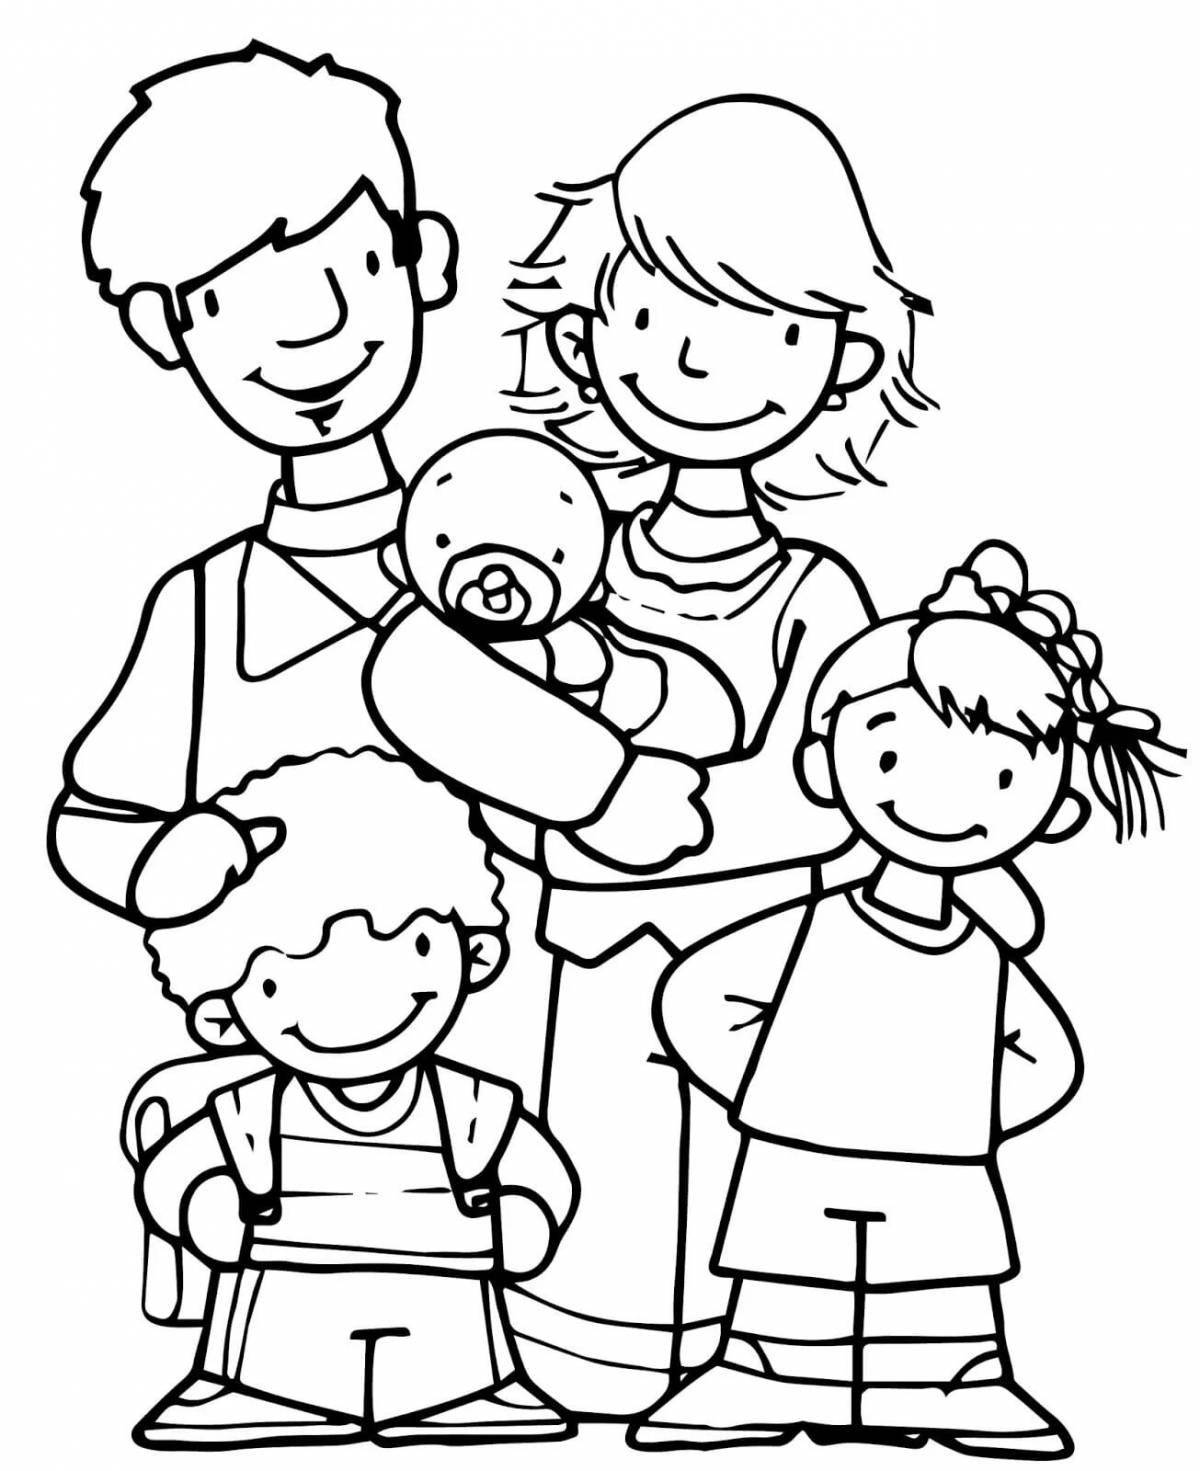 Glitter family coloring book for kids